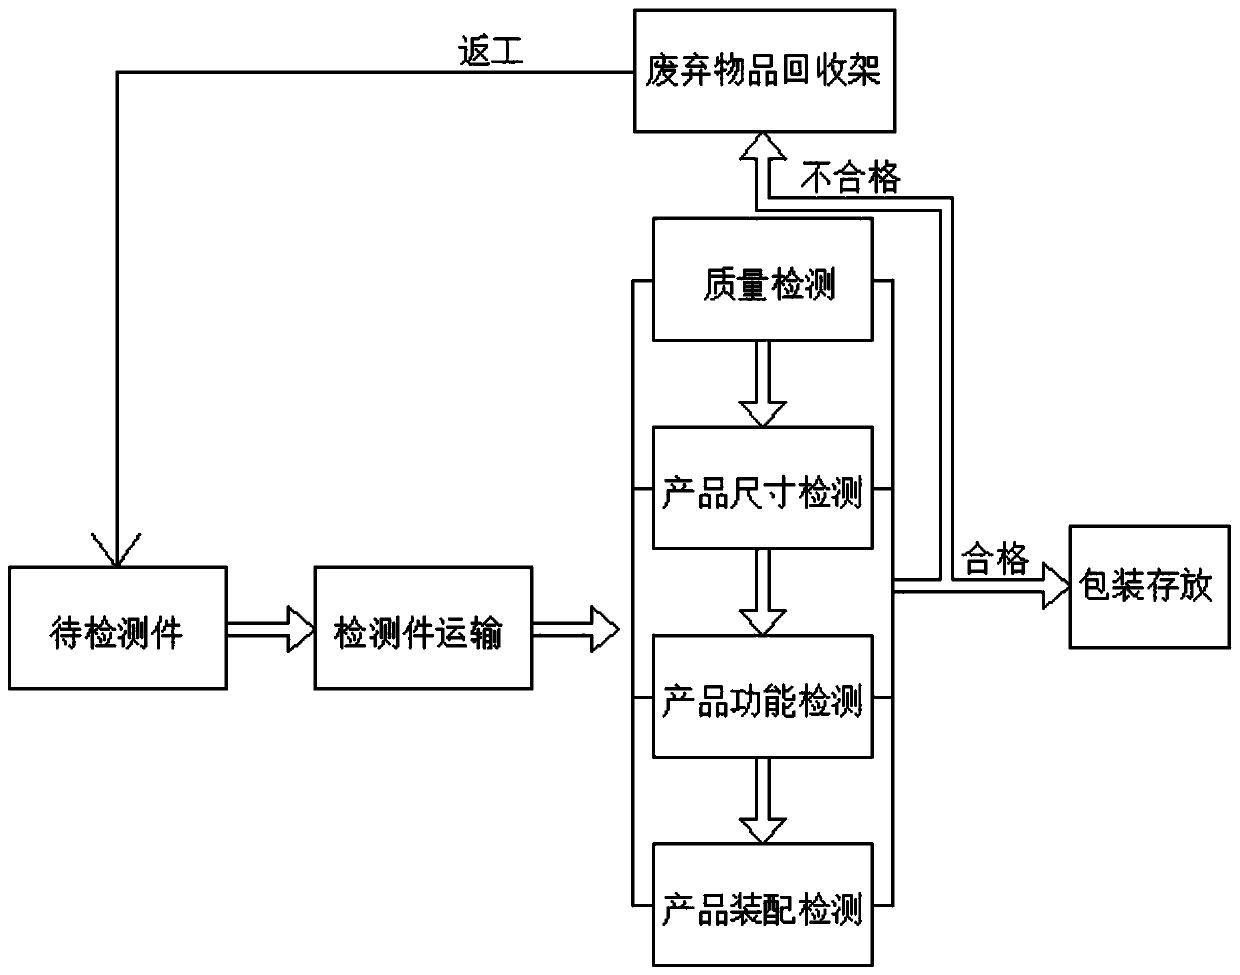 Product production quality inspection process flow